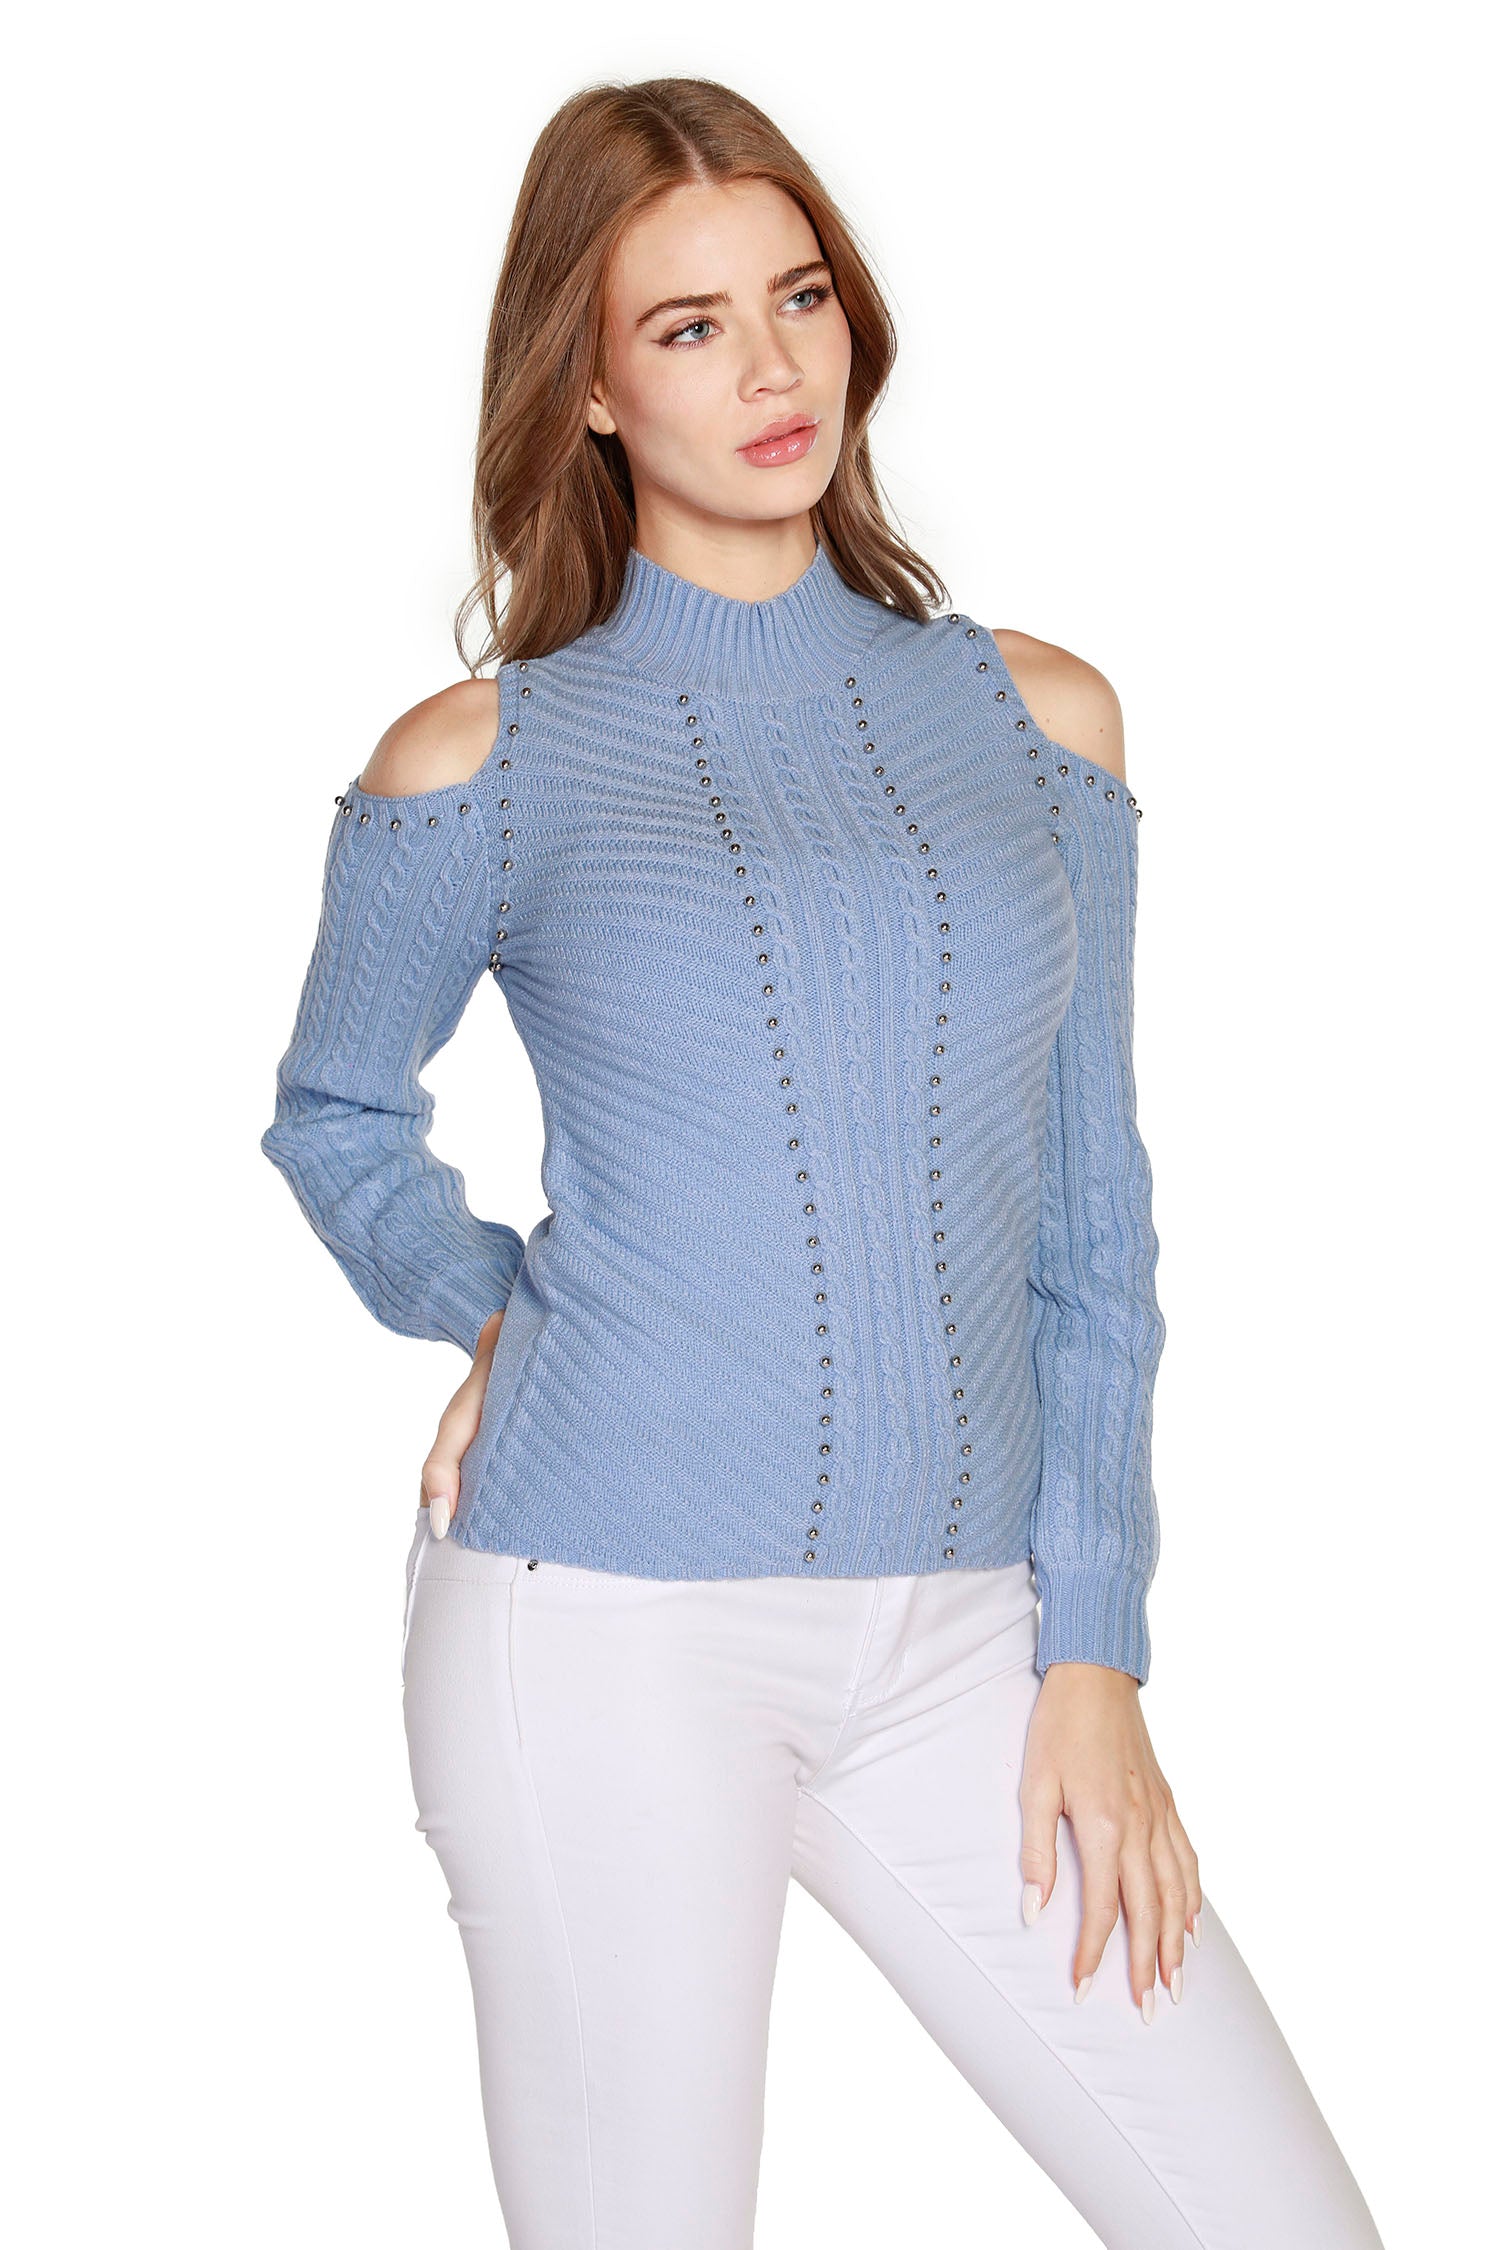 Women's Mock Neck Pullover Cold Shoulder Sweater - LAST CALL